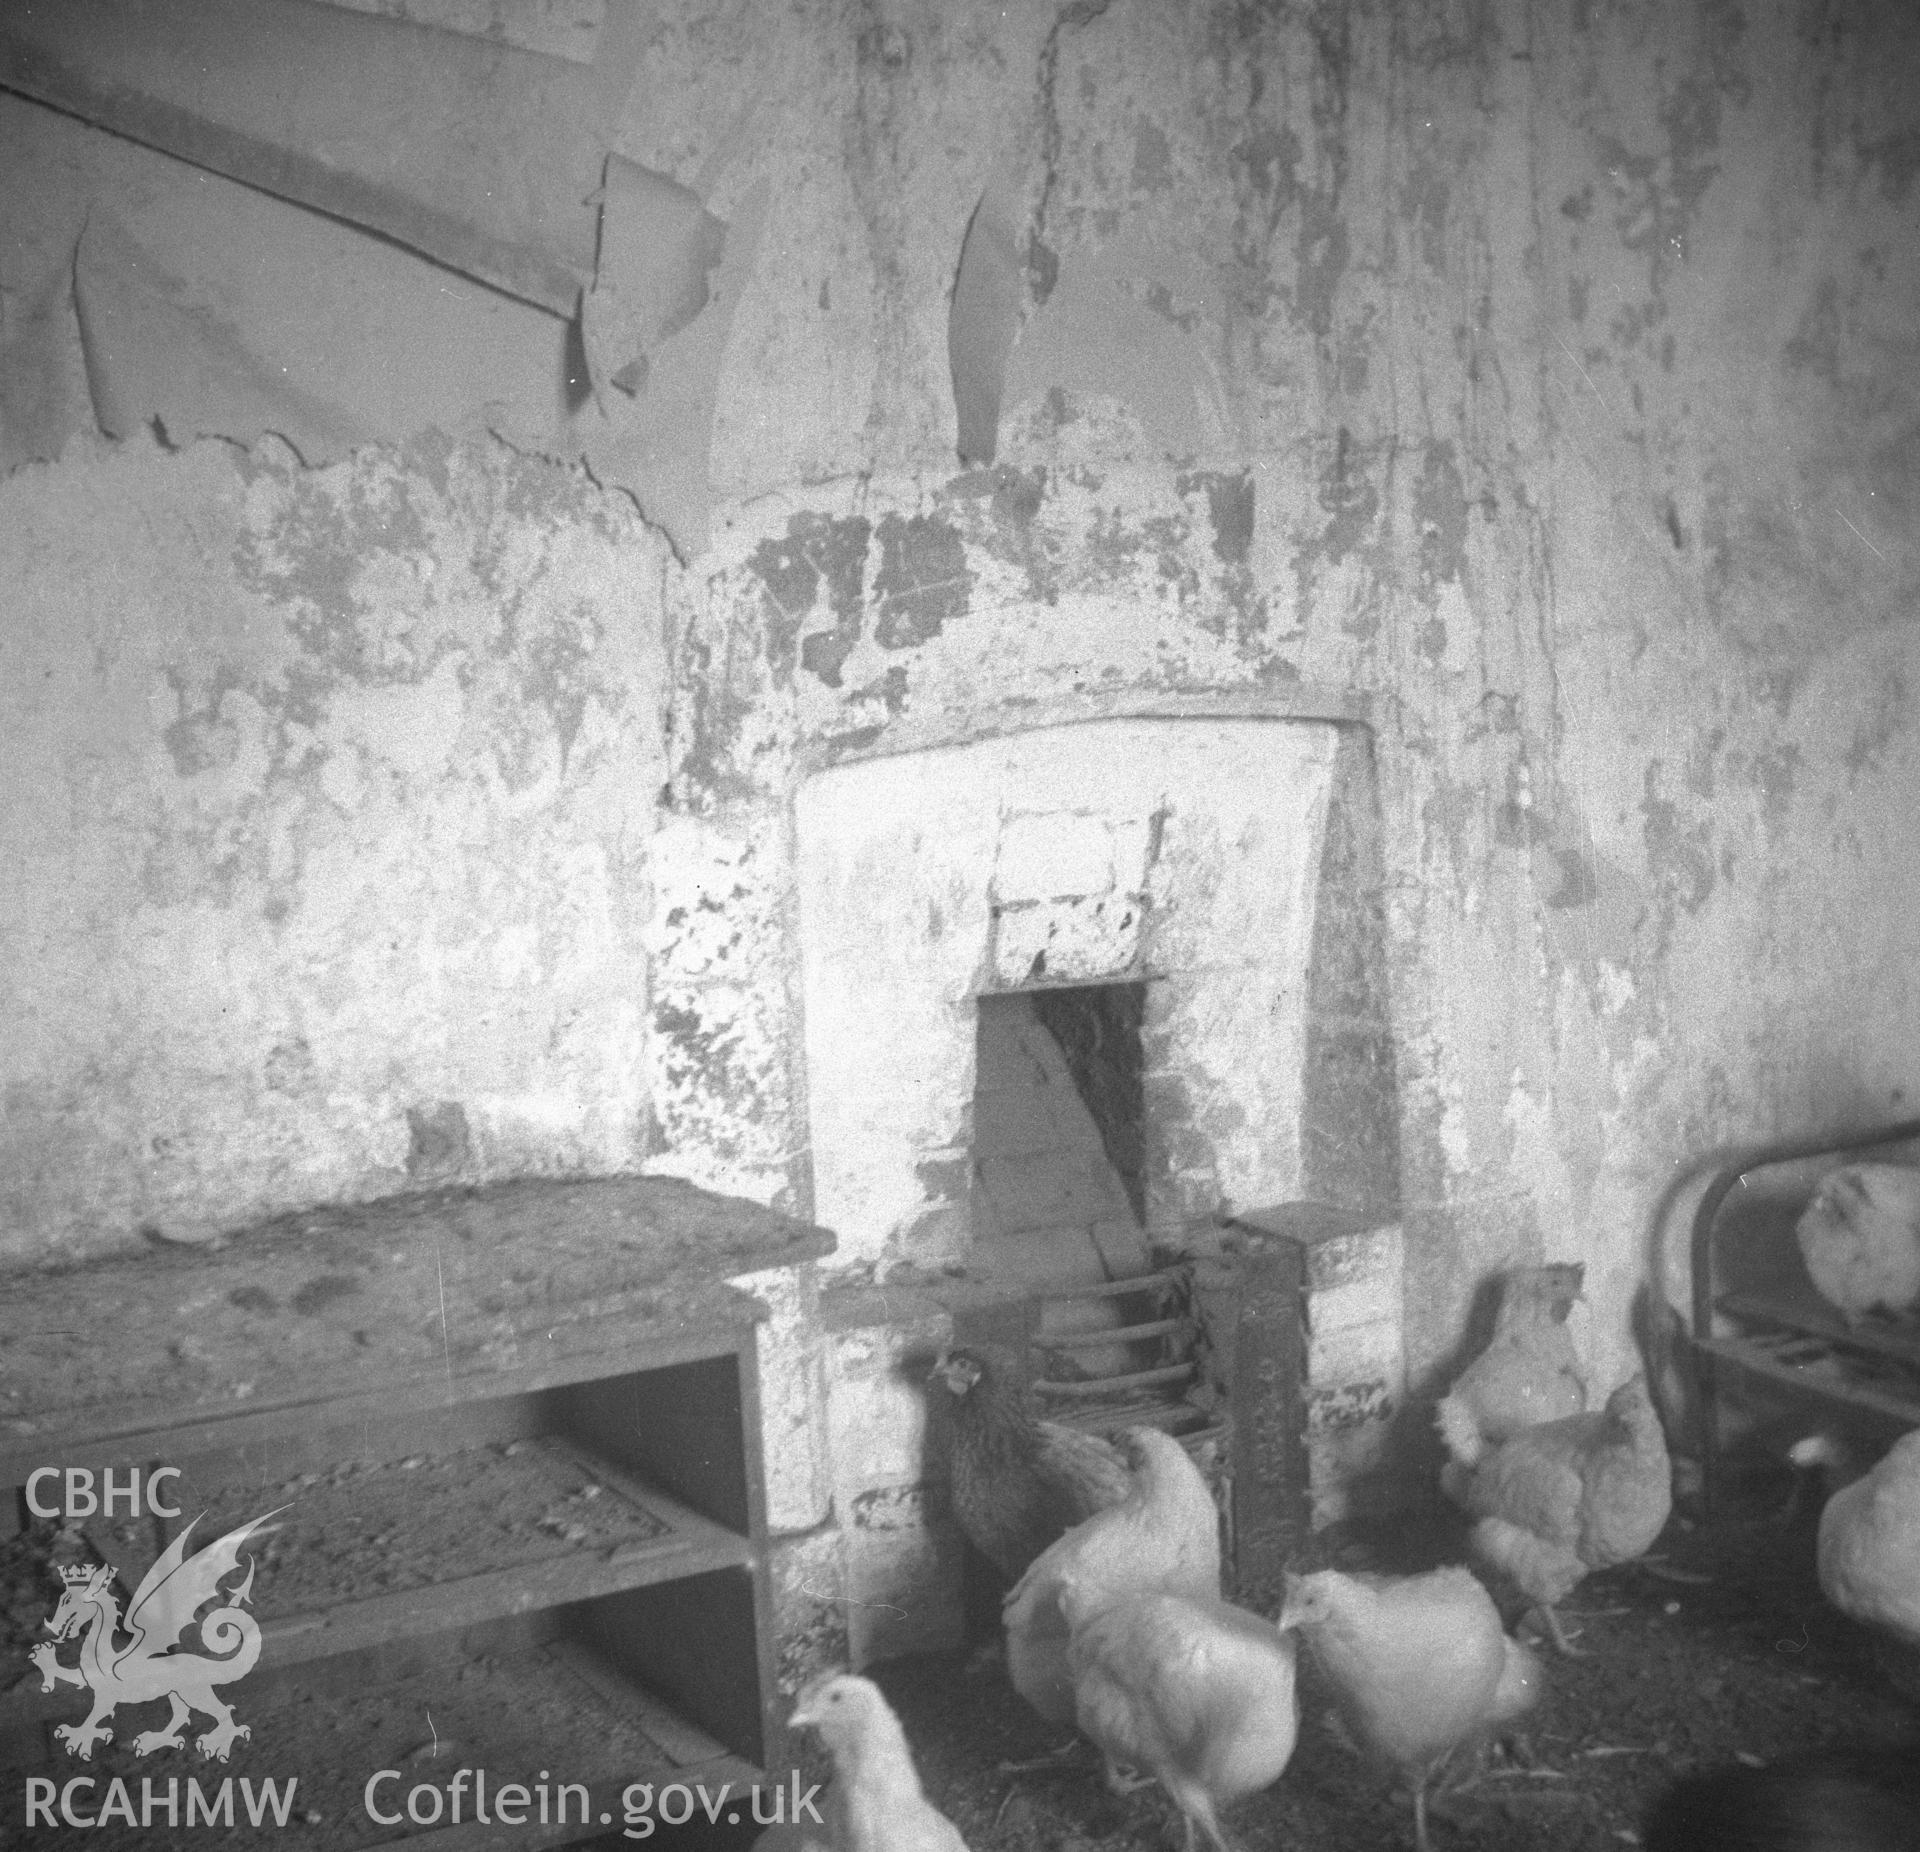 Black and white acetate negative showing interior detail of fireplace at Trimley Hall, Llanfynydd.